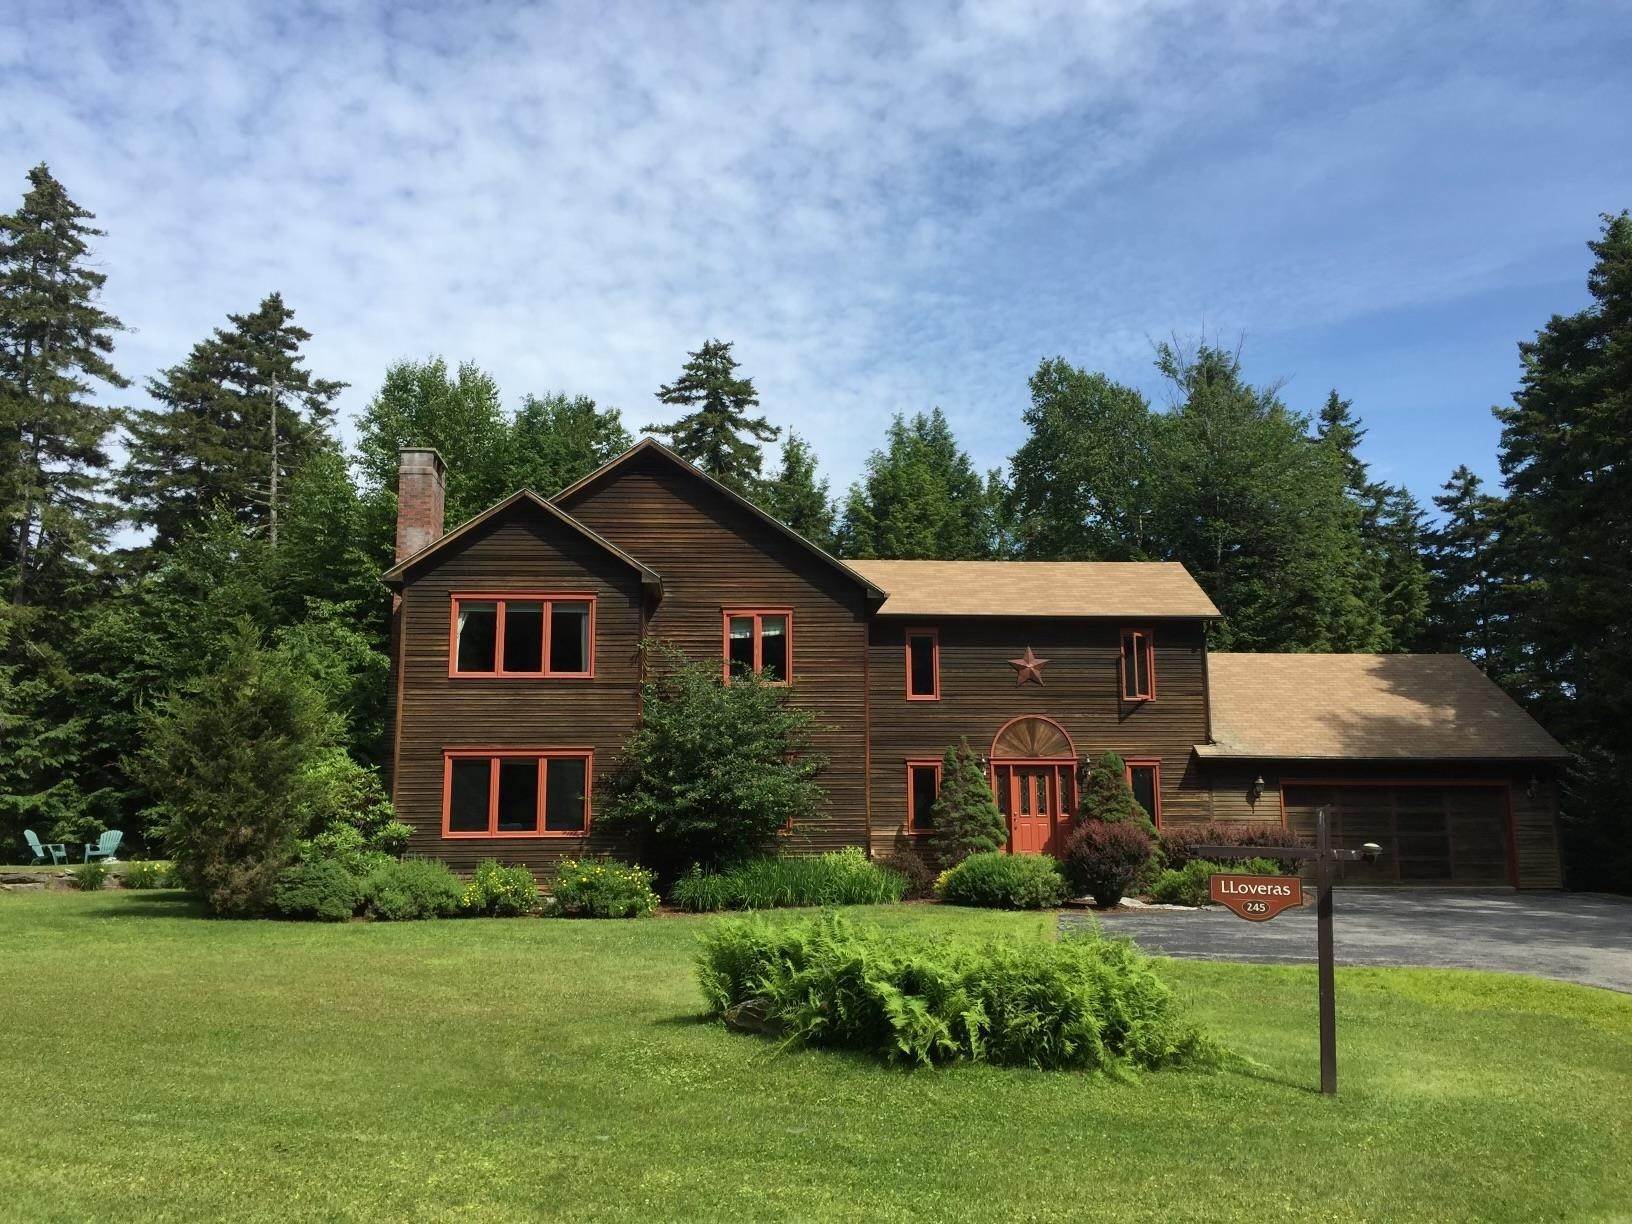 Property for Sale at Stowe, VT 05672